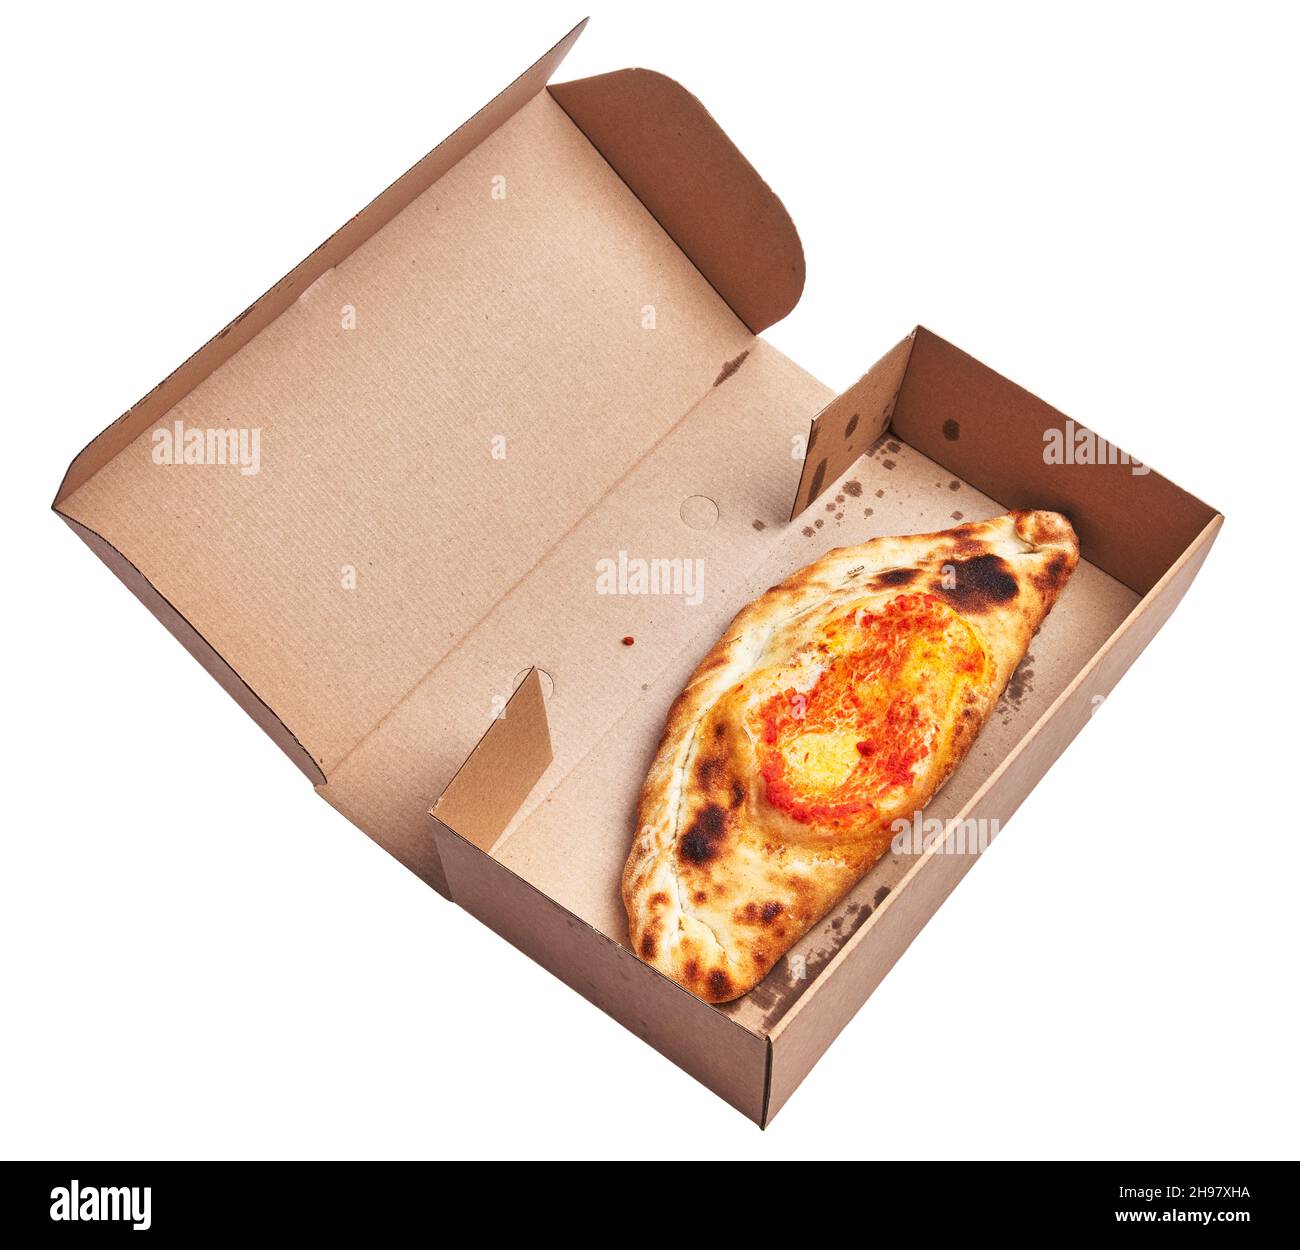 Single calzone italian pizza on delivery box isolated over white background  Stock Photo - Alamy